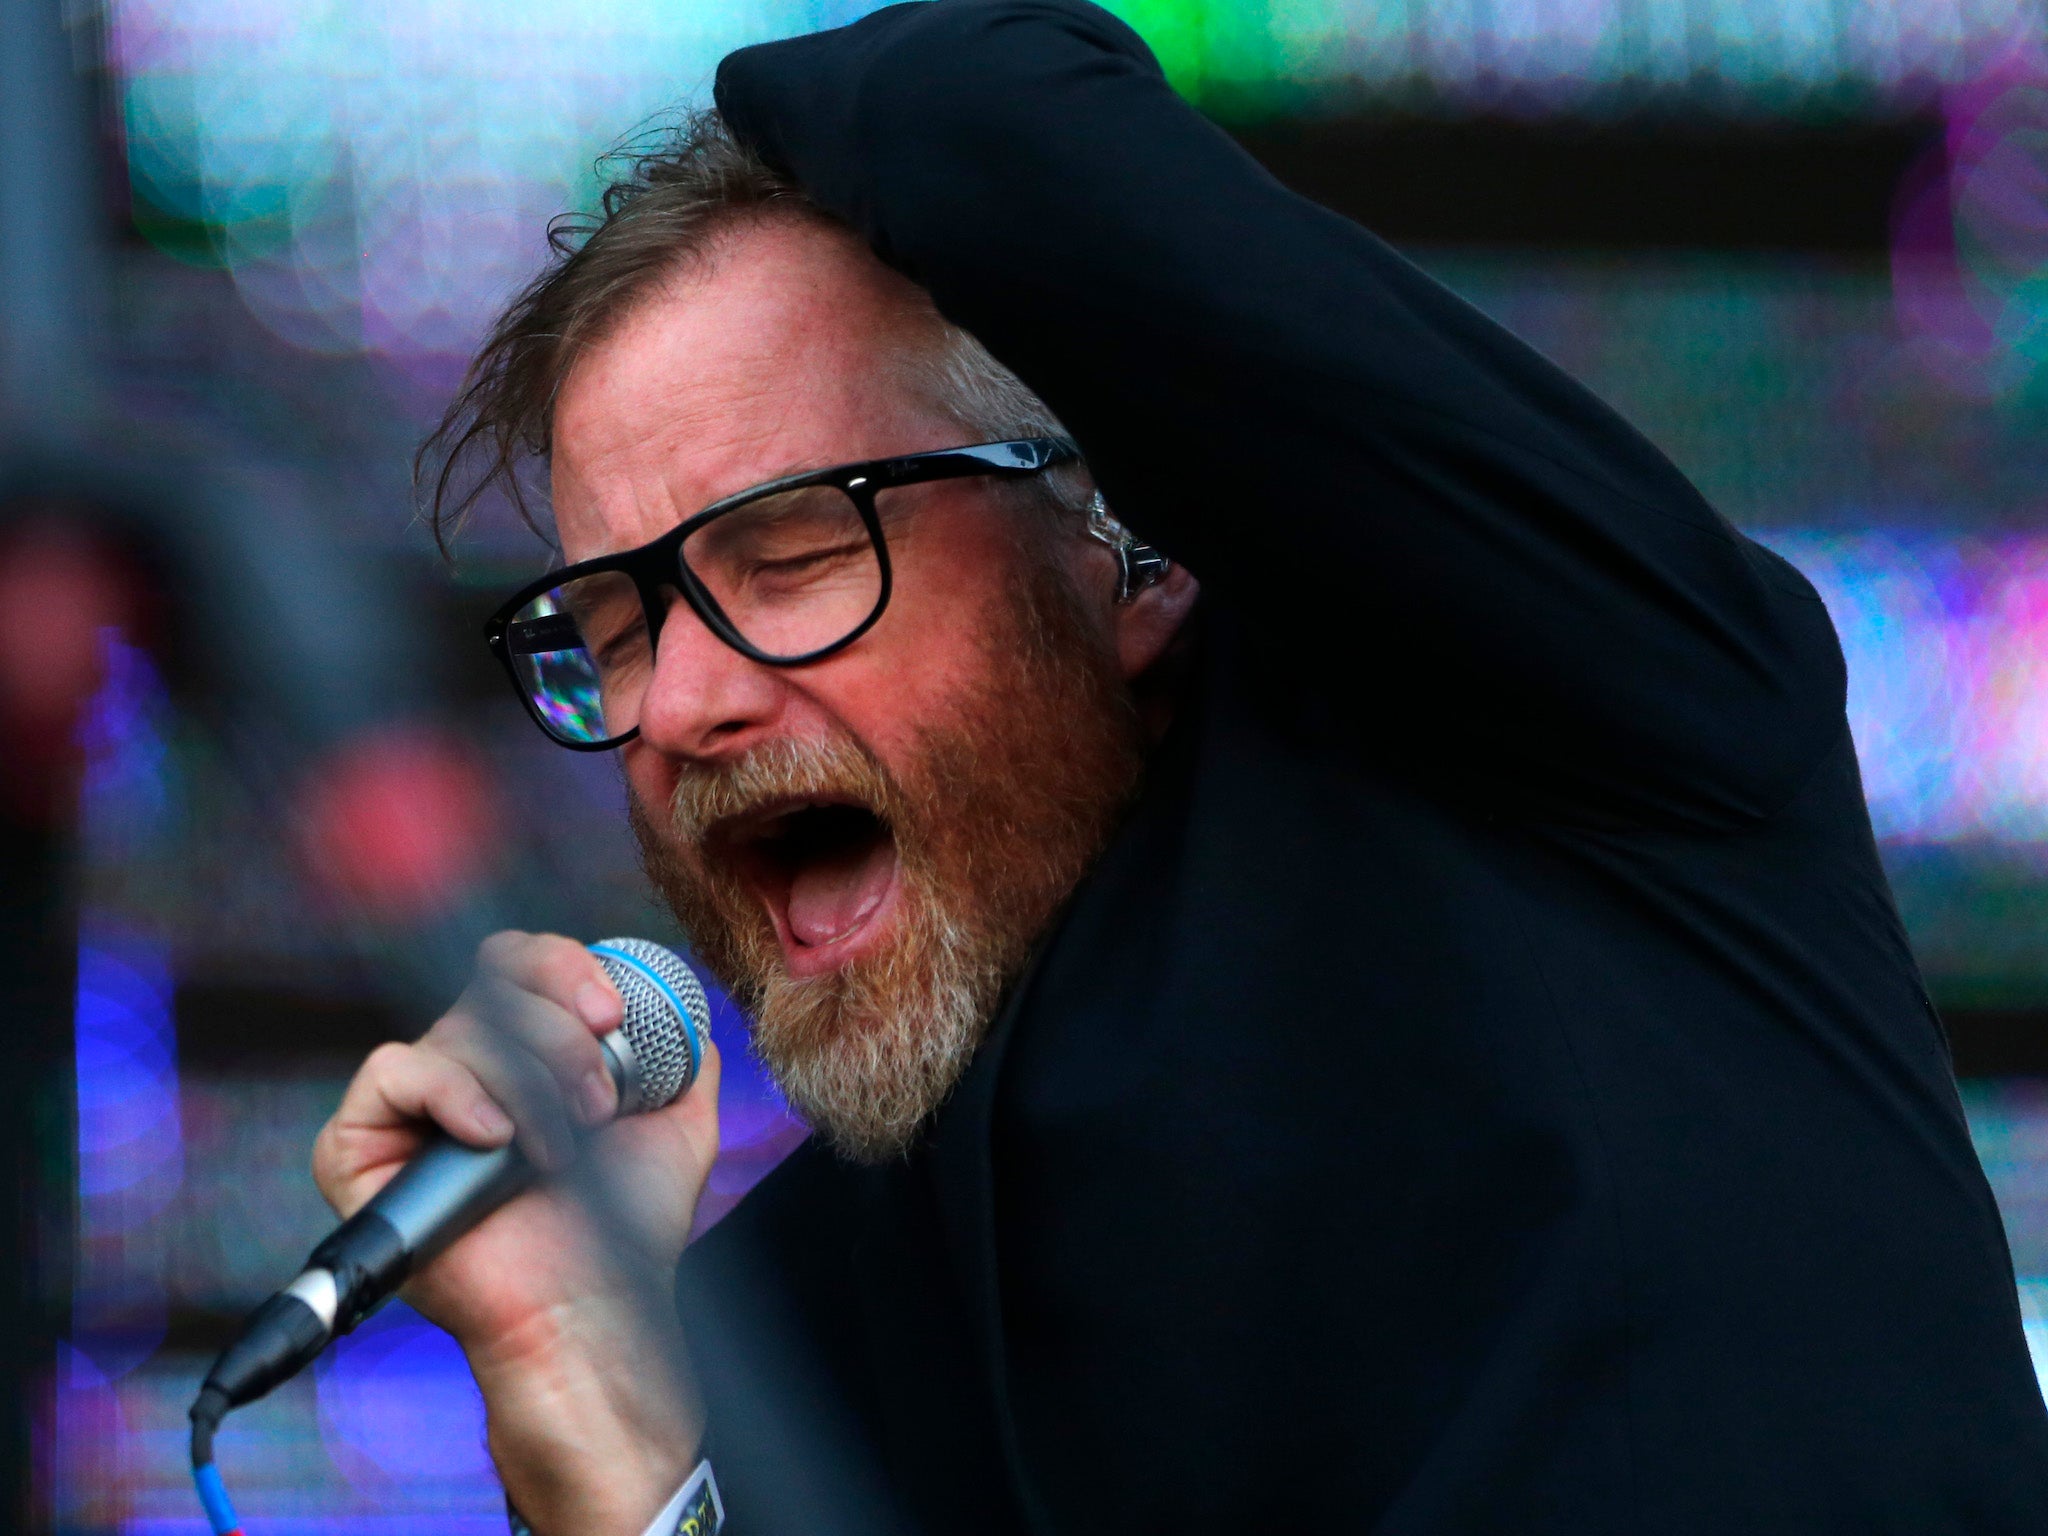 Matt Berninger of The National performs during the first day of Lollapalooza Chile 2018